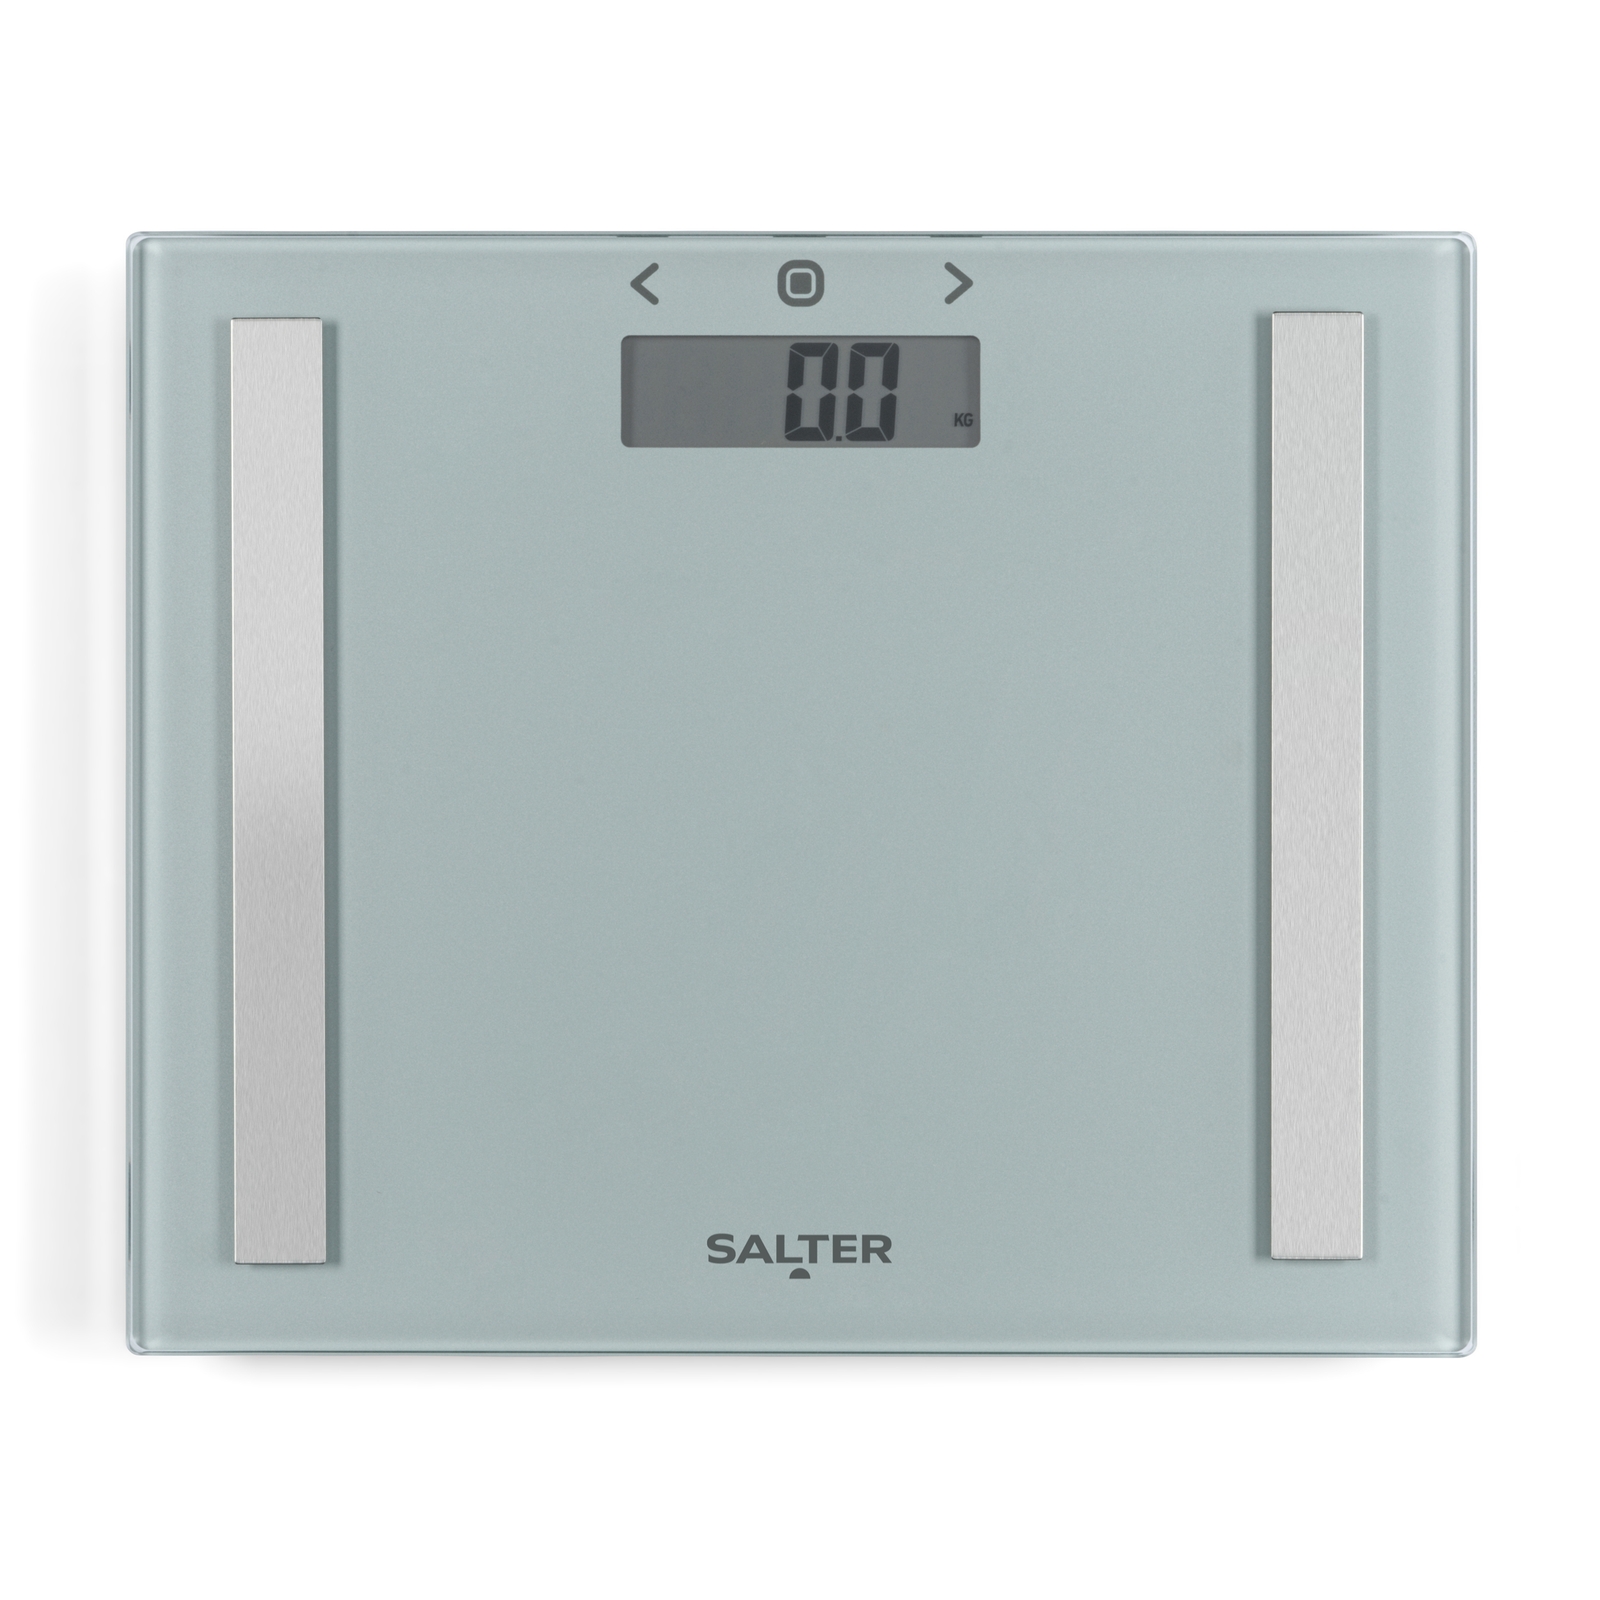 Salter 9113 SV3R Compact Analyser Bathroom Scales - Silver